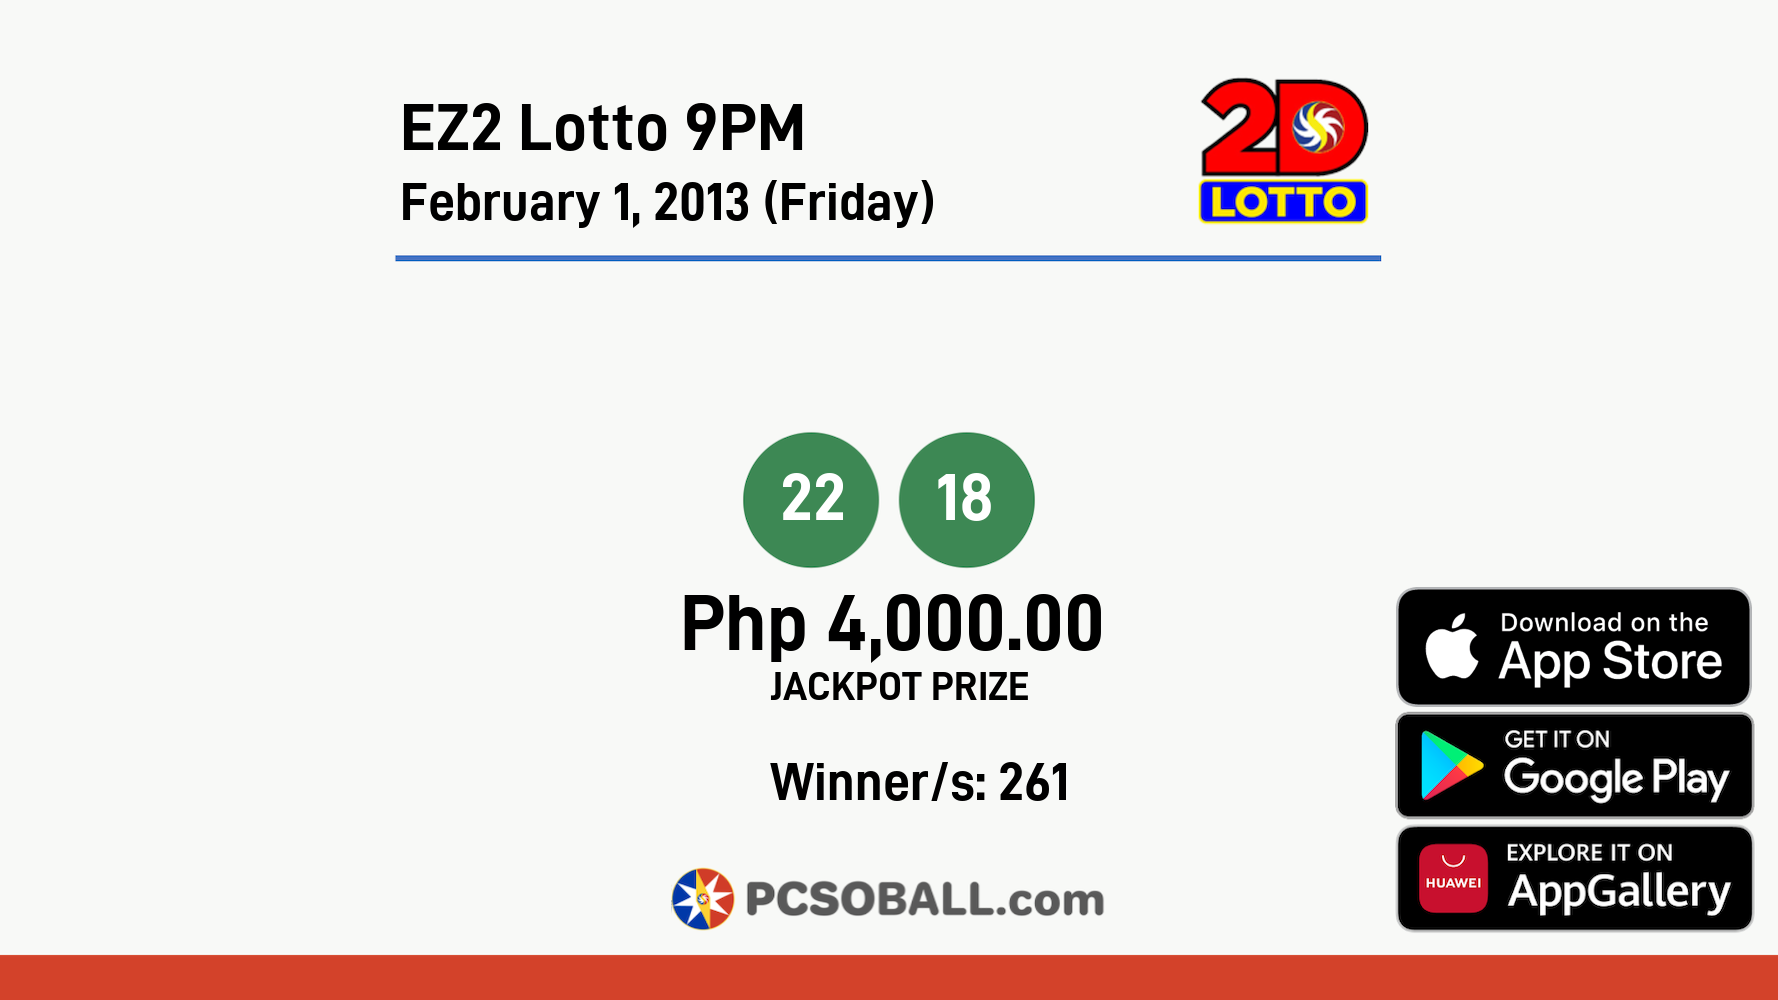 EZ2 Lotto 9PM February 1, 2013 (Friday) Result